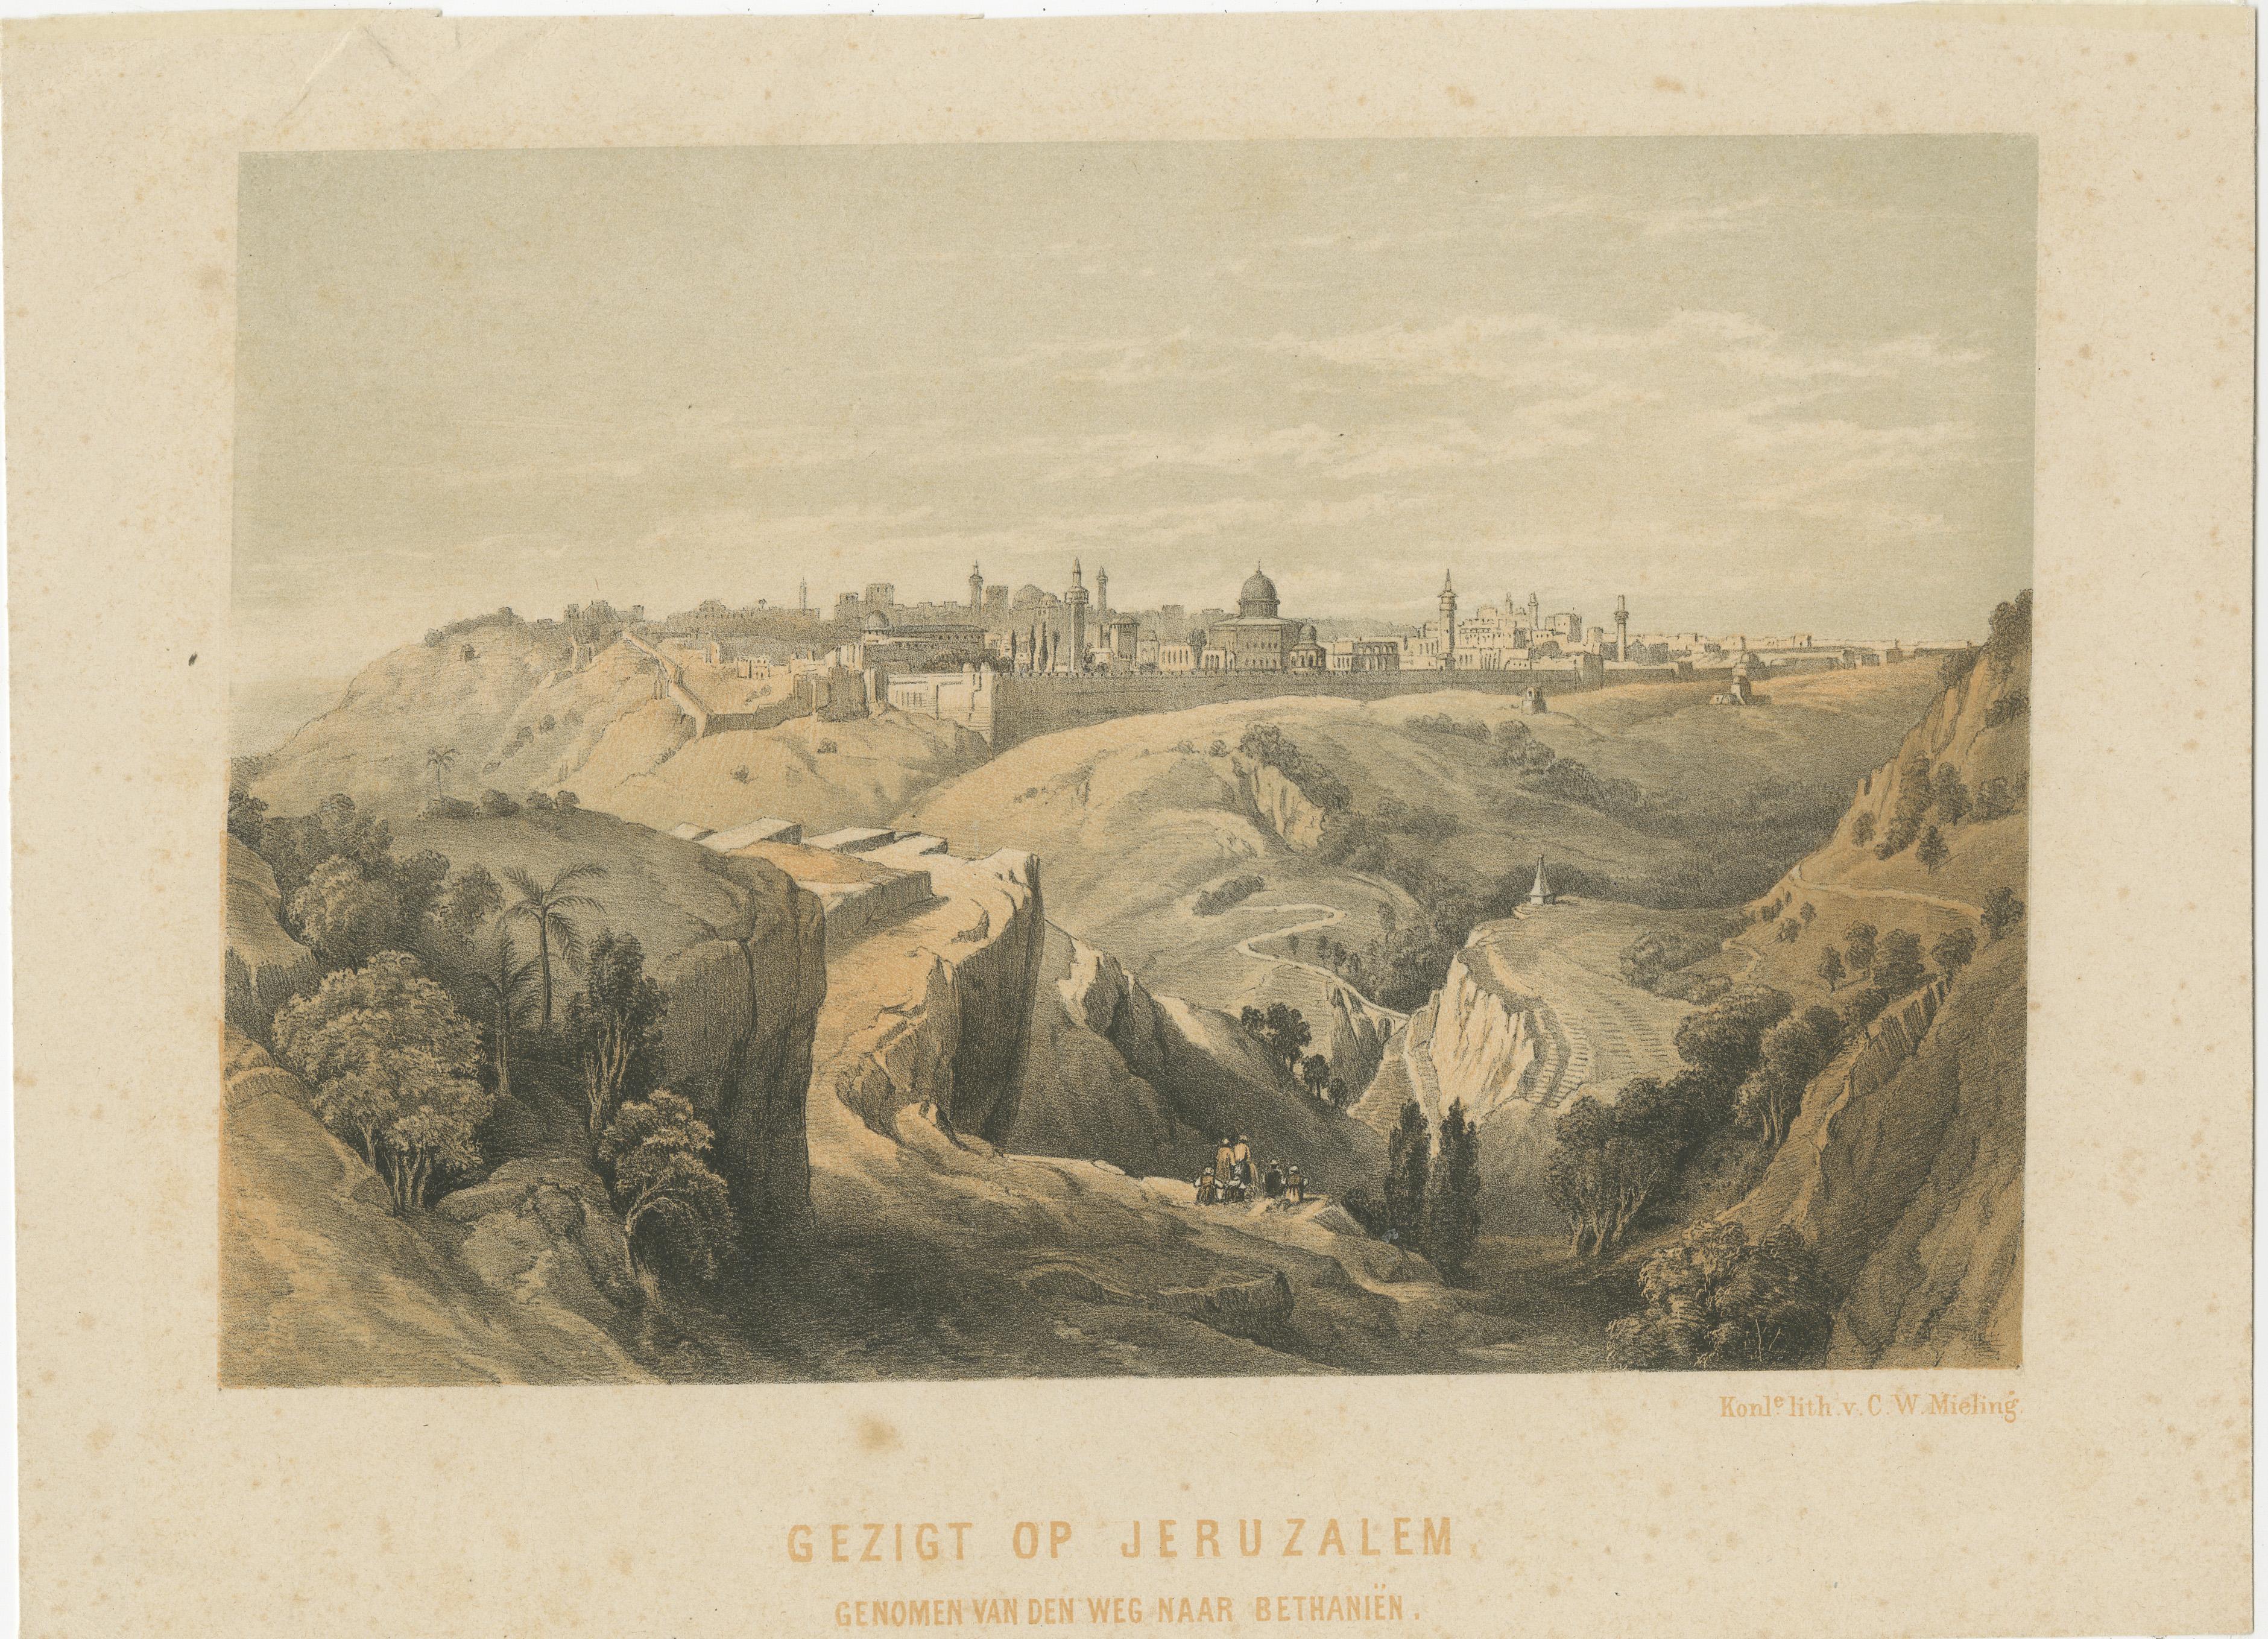 Antique print titled 'Gezigt op Jeruzalem genomen van den weg naar Bethaniën'. Lithograph of Jerusalem from the Road leading to Bethany. Published by C.W. Mieling, circa 1880. 